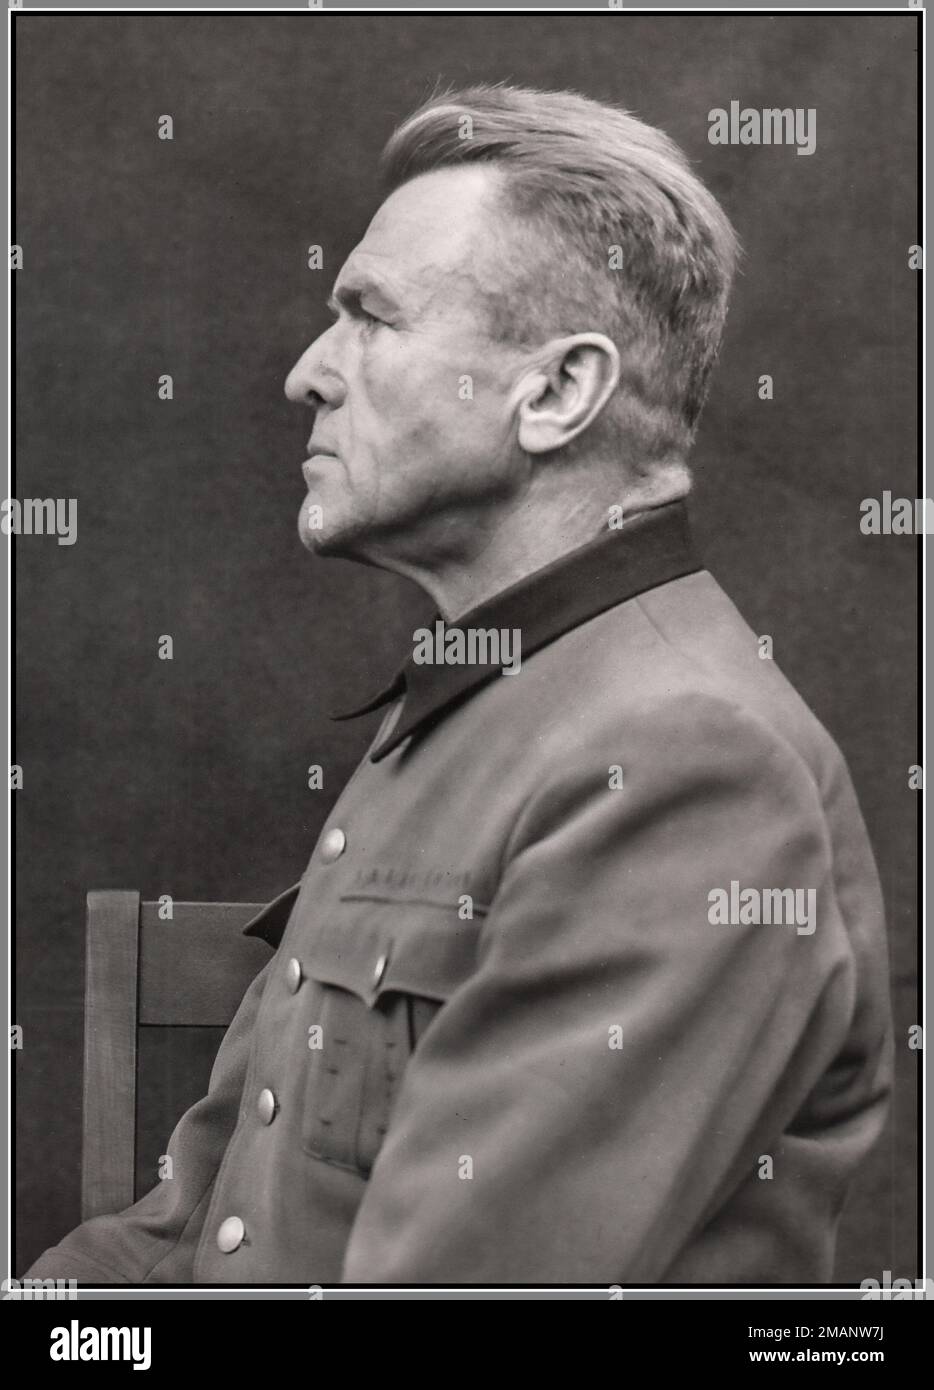 Prisoner Nazi Karl August Genzken 1945 a Nazi physician who conducted human experiments on prisoners of several concentration camps. He was a Gruppenführer of the Waffen-SS and the Chief of the Medical Office of the Waffen-SS. Genzken was tried as a war criminal in the Doctors' Trial at Nuremberg. He escaped the death penalty and was sentenced to life imprisonment. Stock Photo